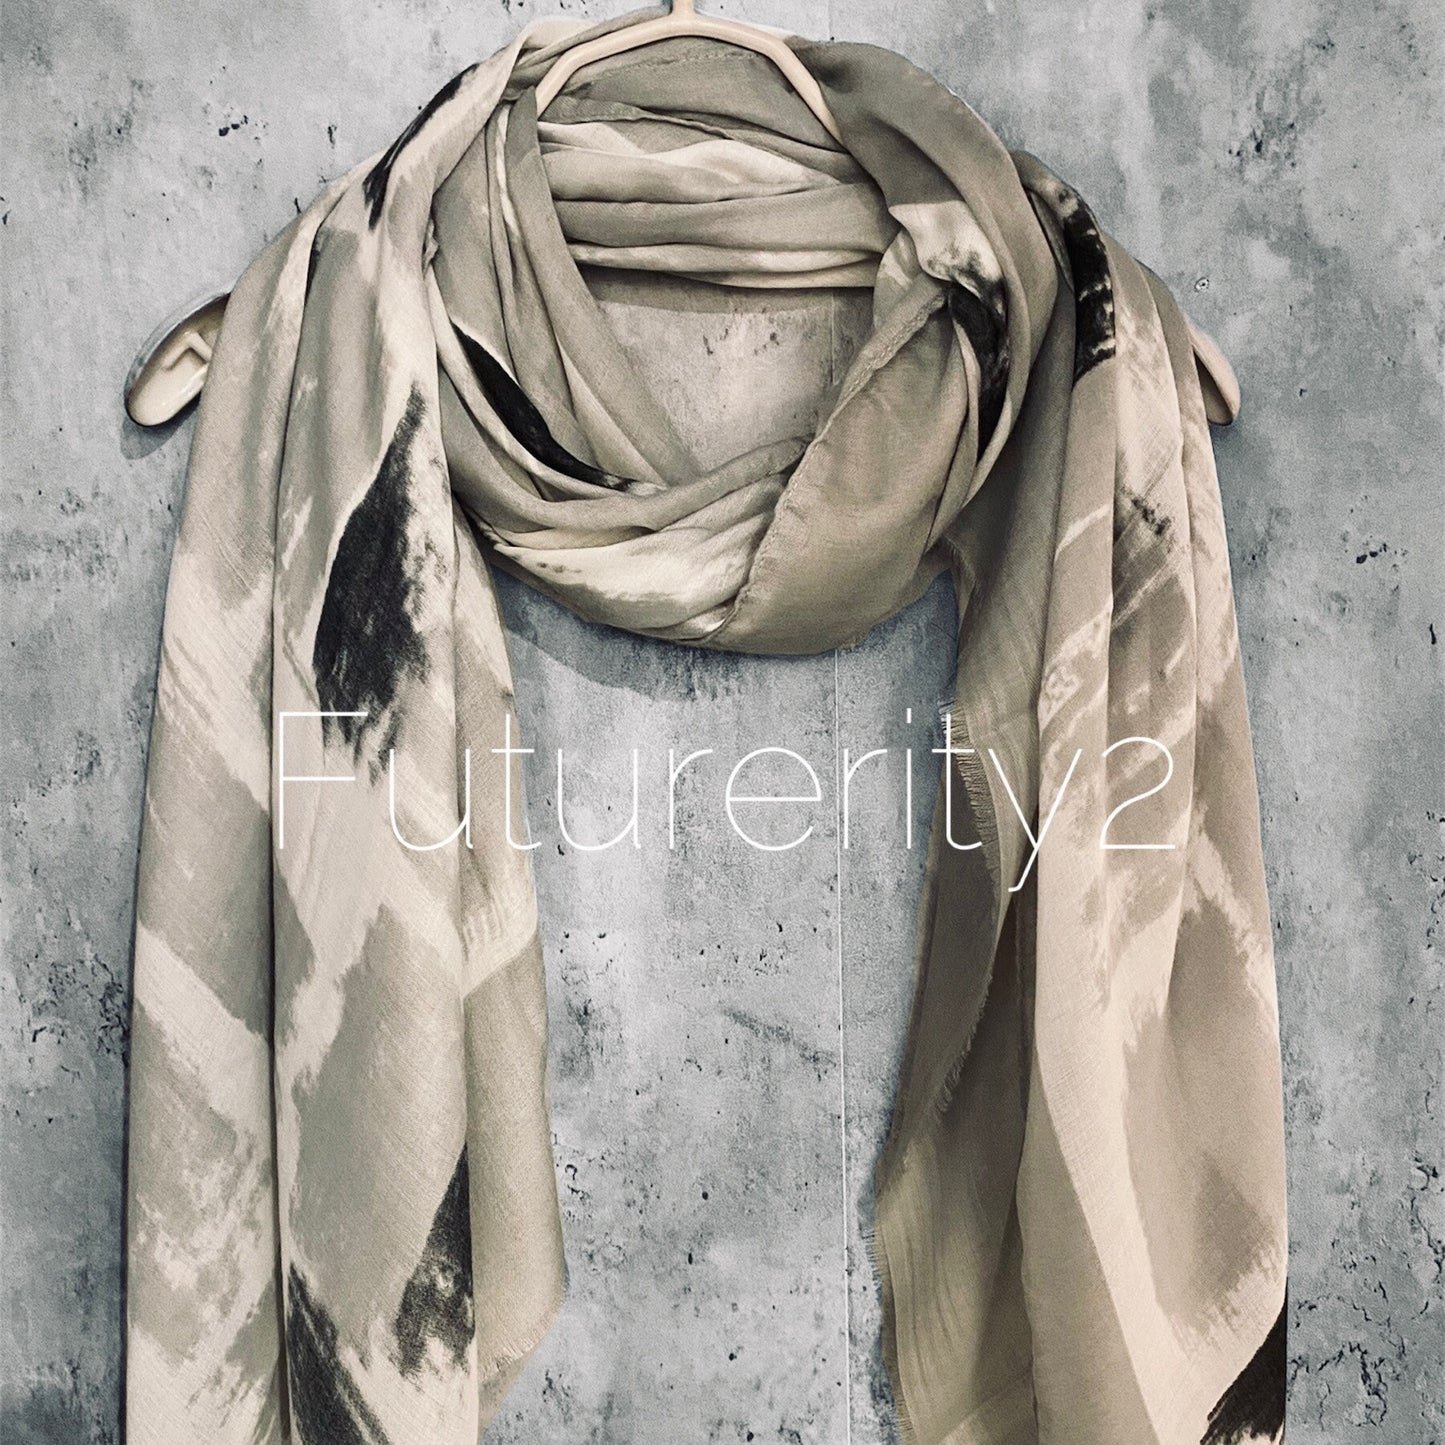 Watercolour Brushed Pattern Grey Cotton Scarf/Spring Summer Autumn Scarf/Gifts For mom/Scarf Women/UK Seller/Gifts For Her Birthday